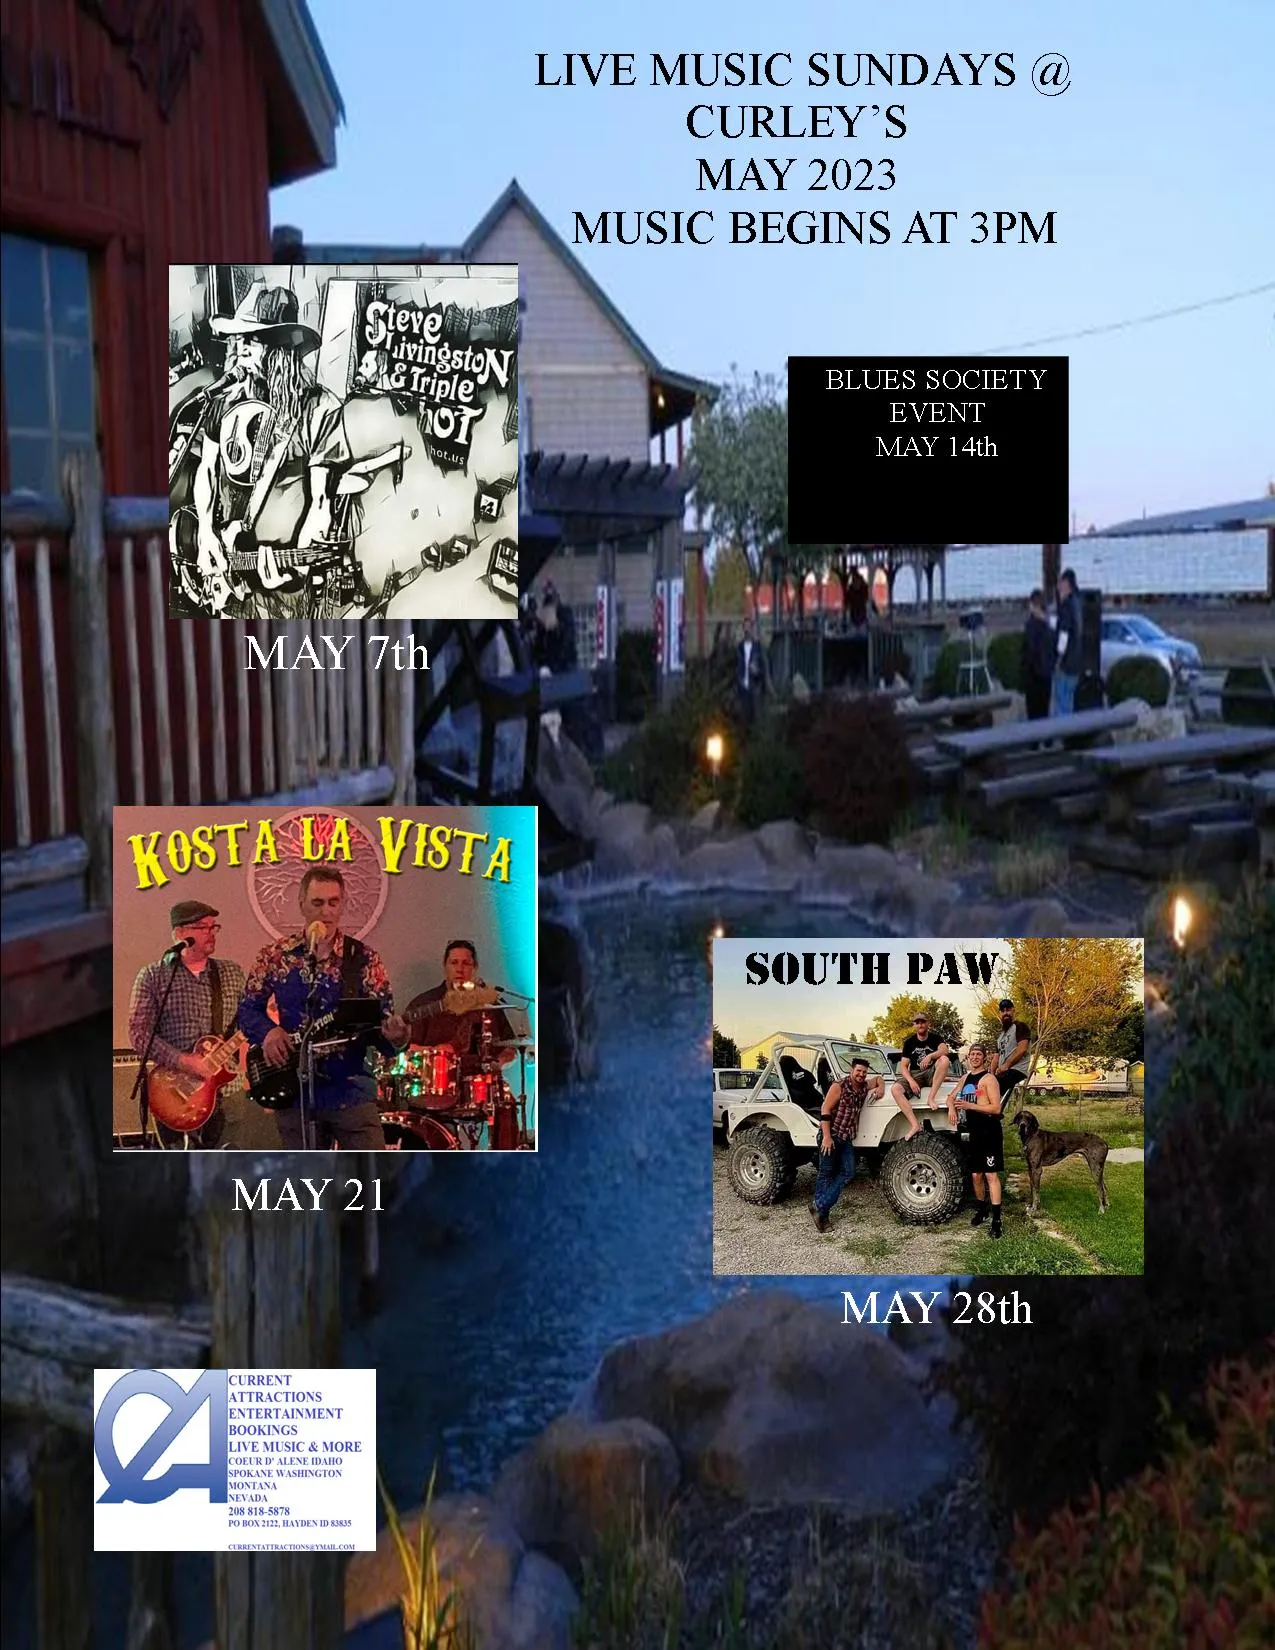 Curley's Sunday Band Calendar for May